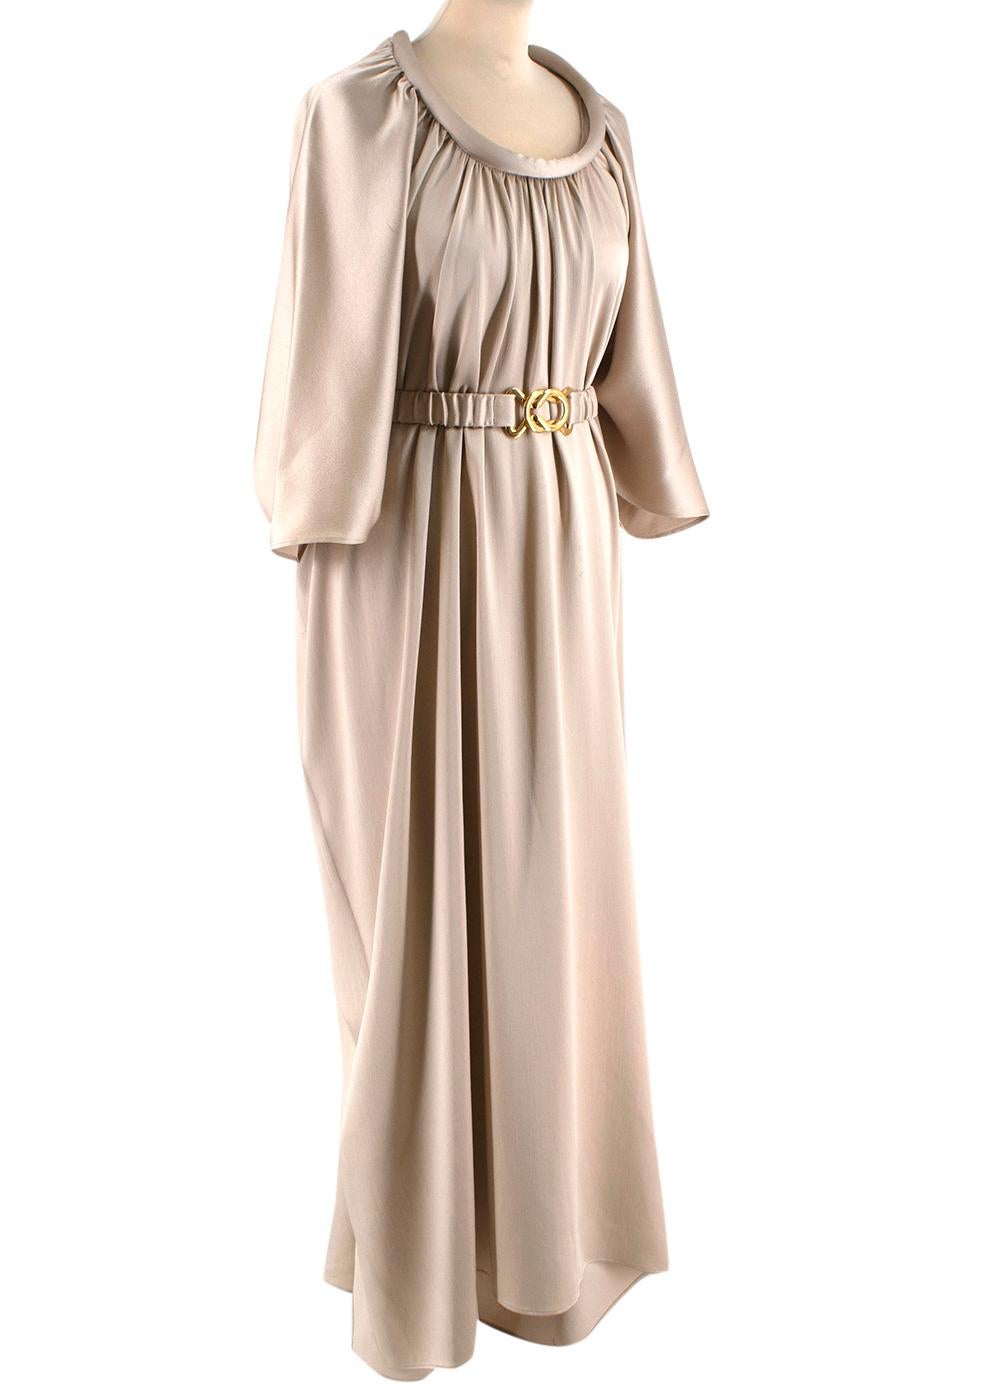 Dodo Bar Or Structured Round Collar Satin Draped Dress 

- Structured Round Collar Satin Draped Dress 
- Comes with a beige belt with gold hardware 
- Oversized fit 


Materials:
73% Viscose 
27%Acetate
Dry Cleaning only
made in Romania 

PLEASE